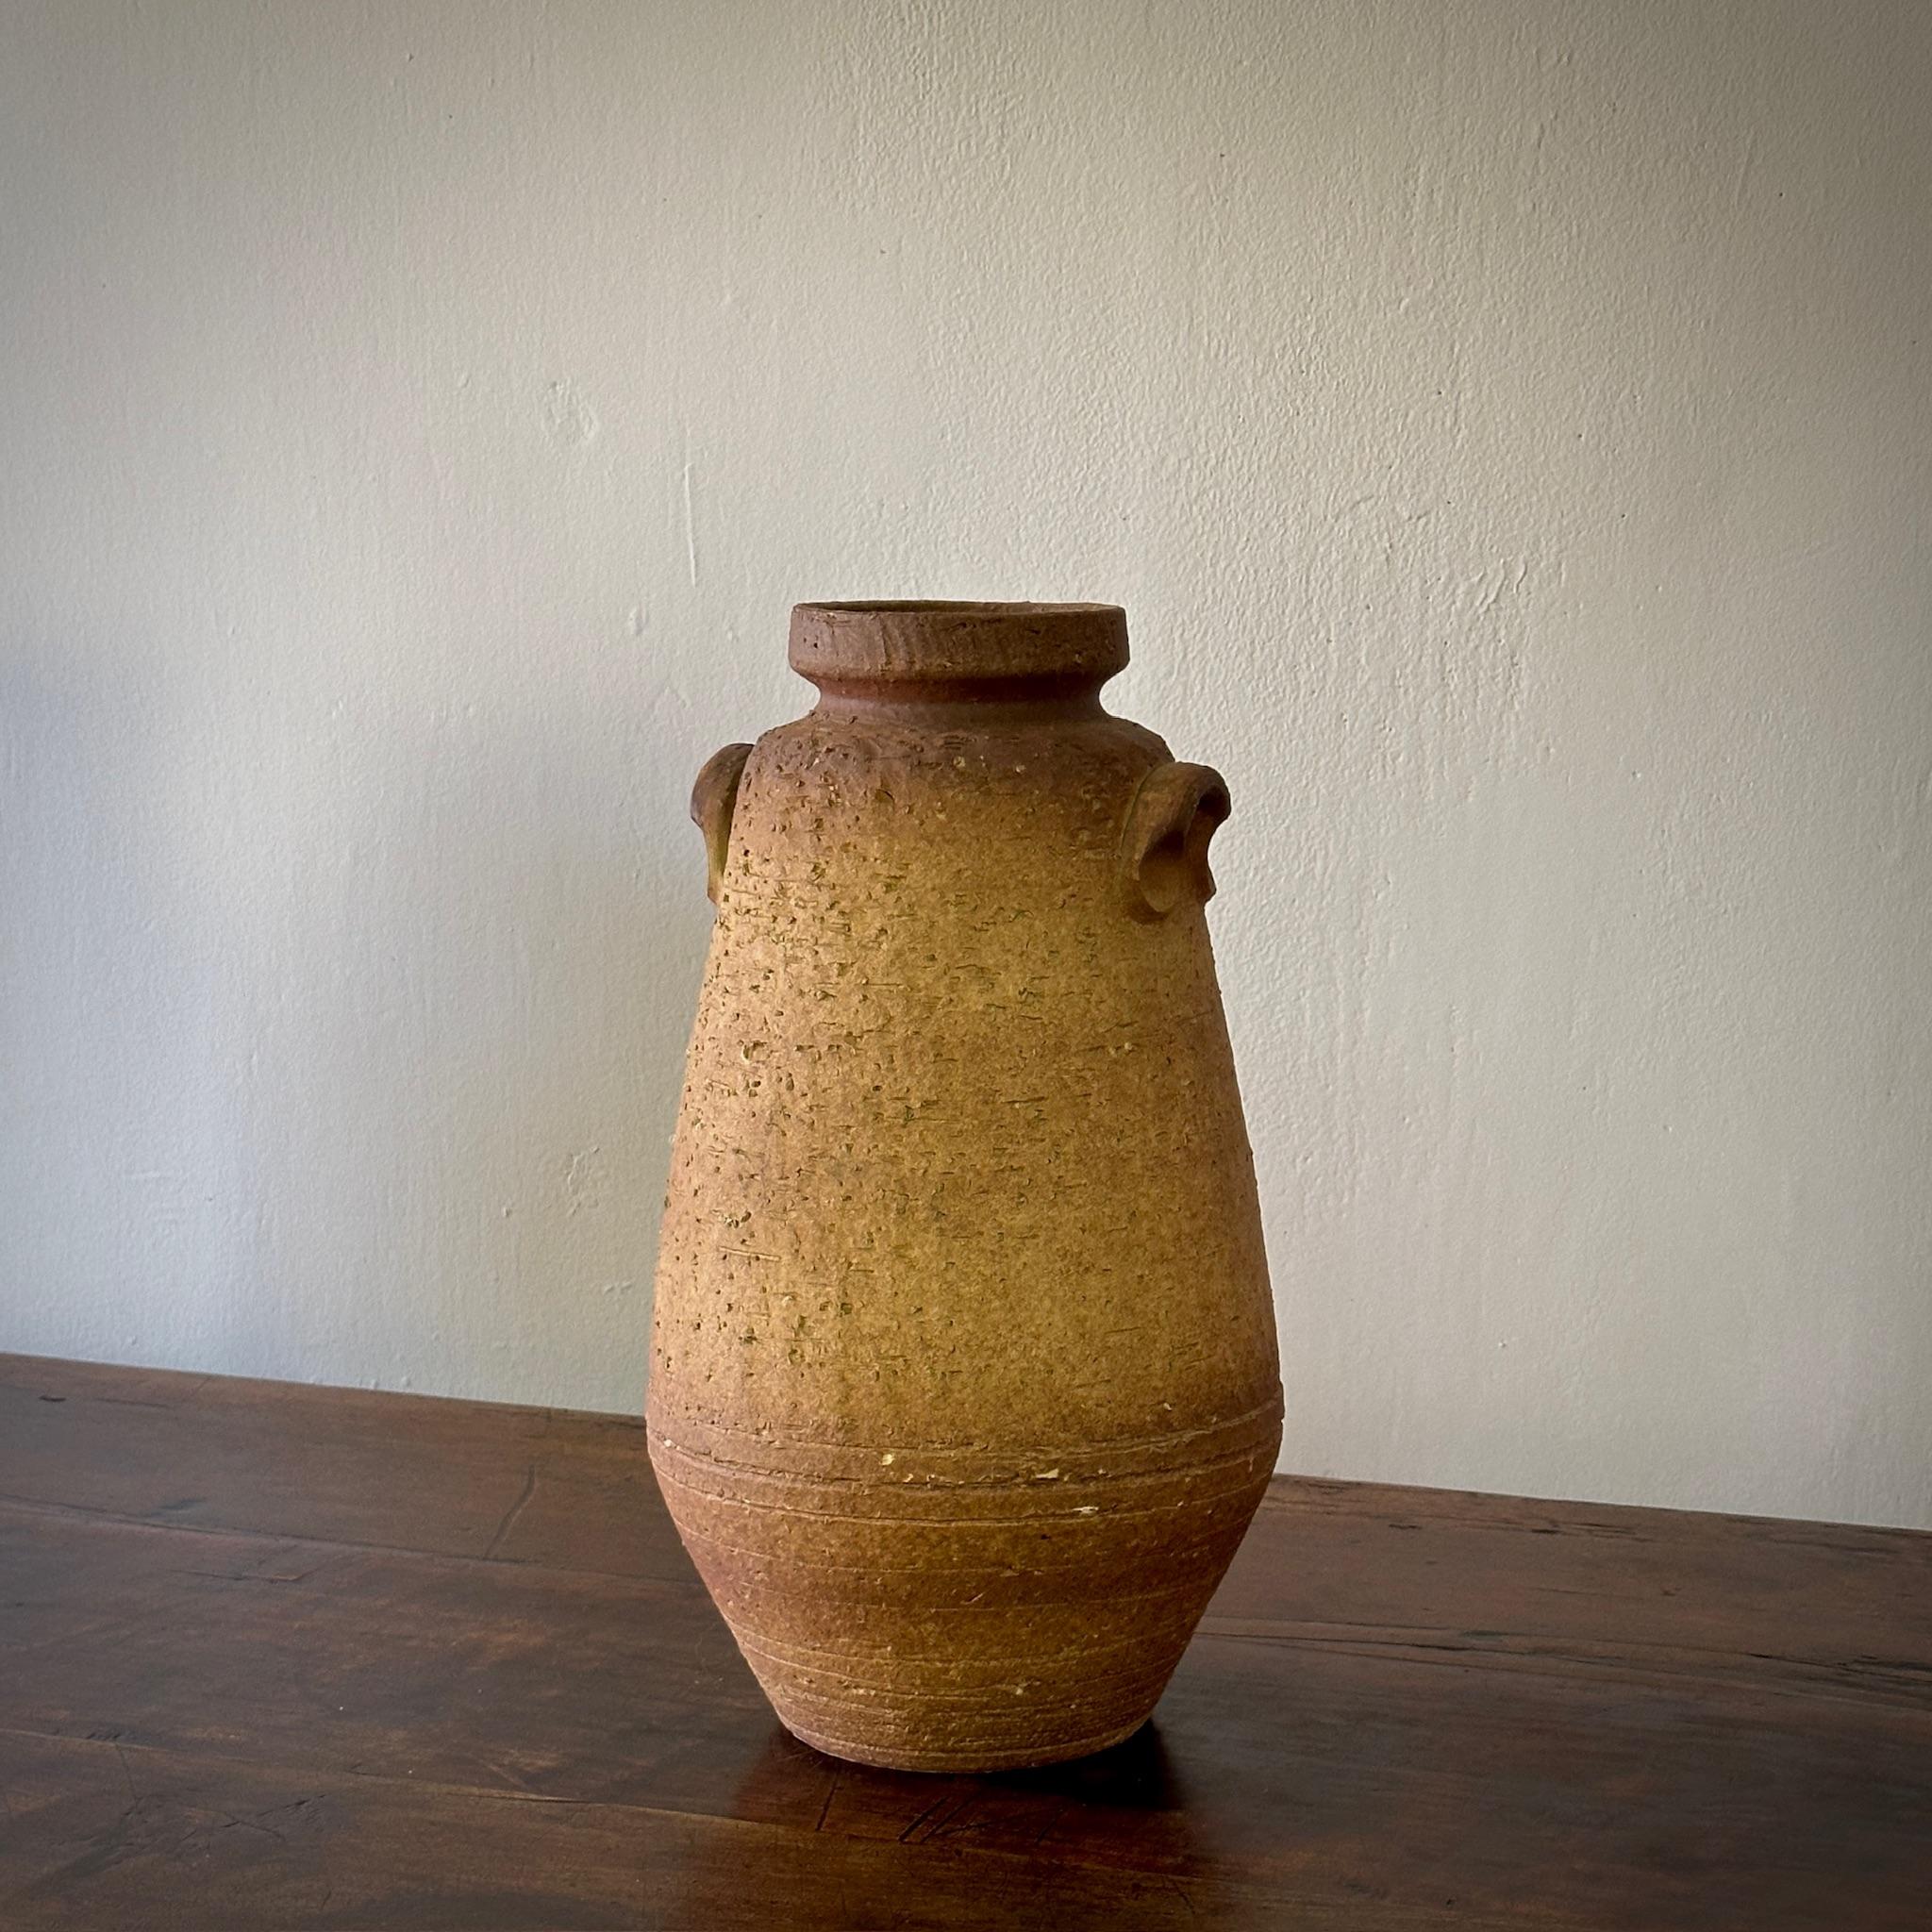 1960s earth-toned glazed ceramic vessel. With a textural finish, this vessel is defined by a refined rusticity.

France, circa 1960

Dimensions: 9.5W x 9.5D 17.5H